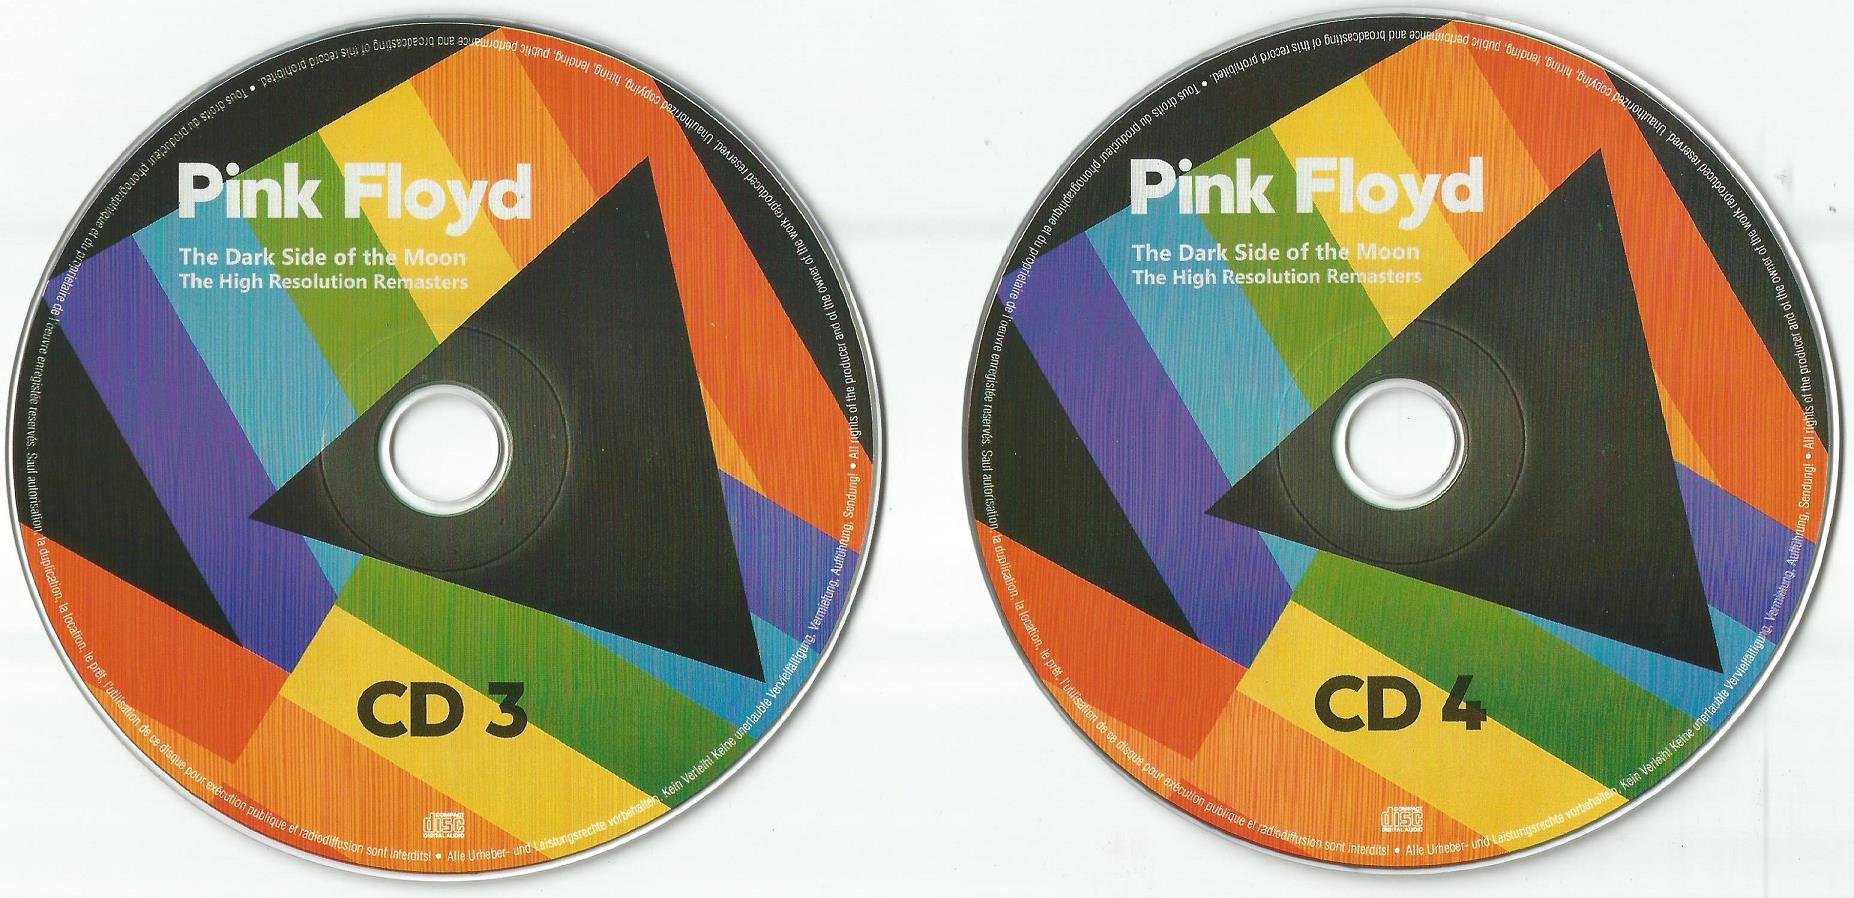 TГ©lГ©charger un fichier Pink Floyd - The Dark Side Of The Moon (2011) [Hi-Res stereo].zip (870,81 Mb) In free mode | Turbobit.net